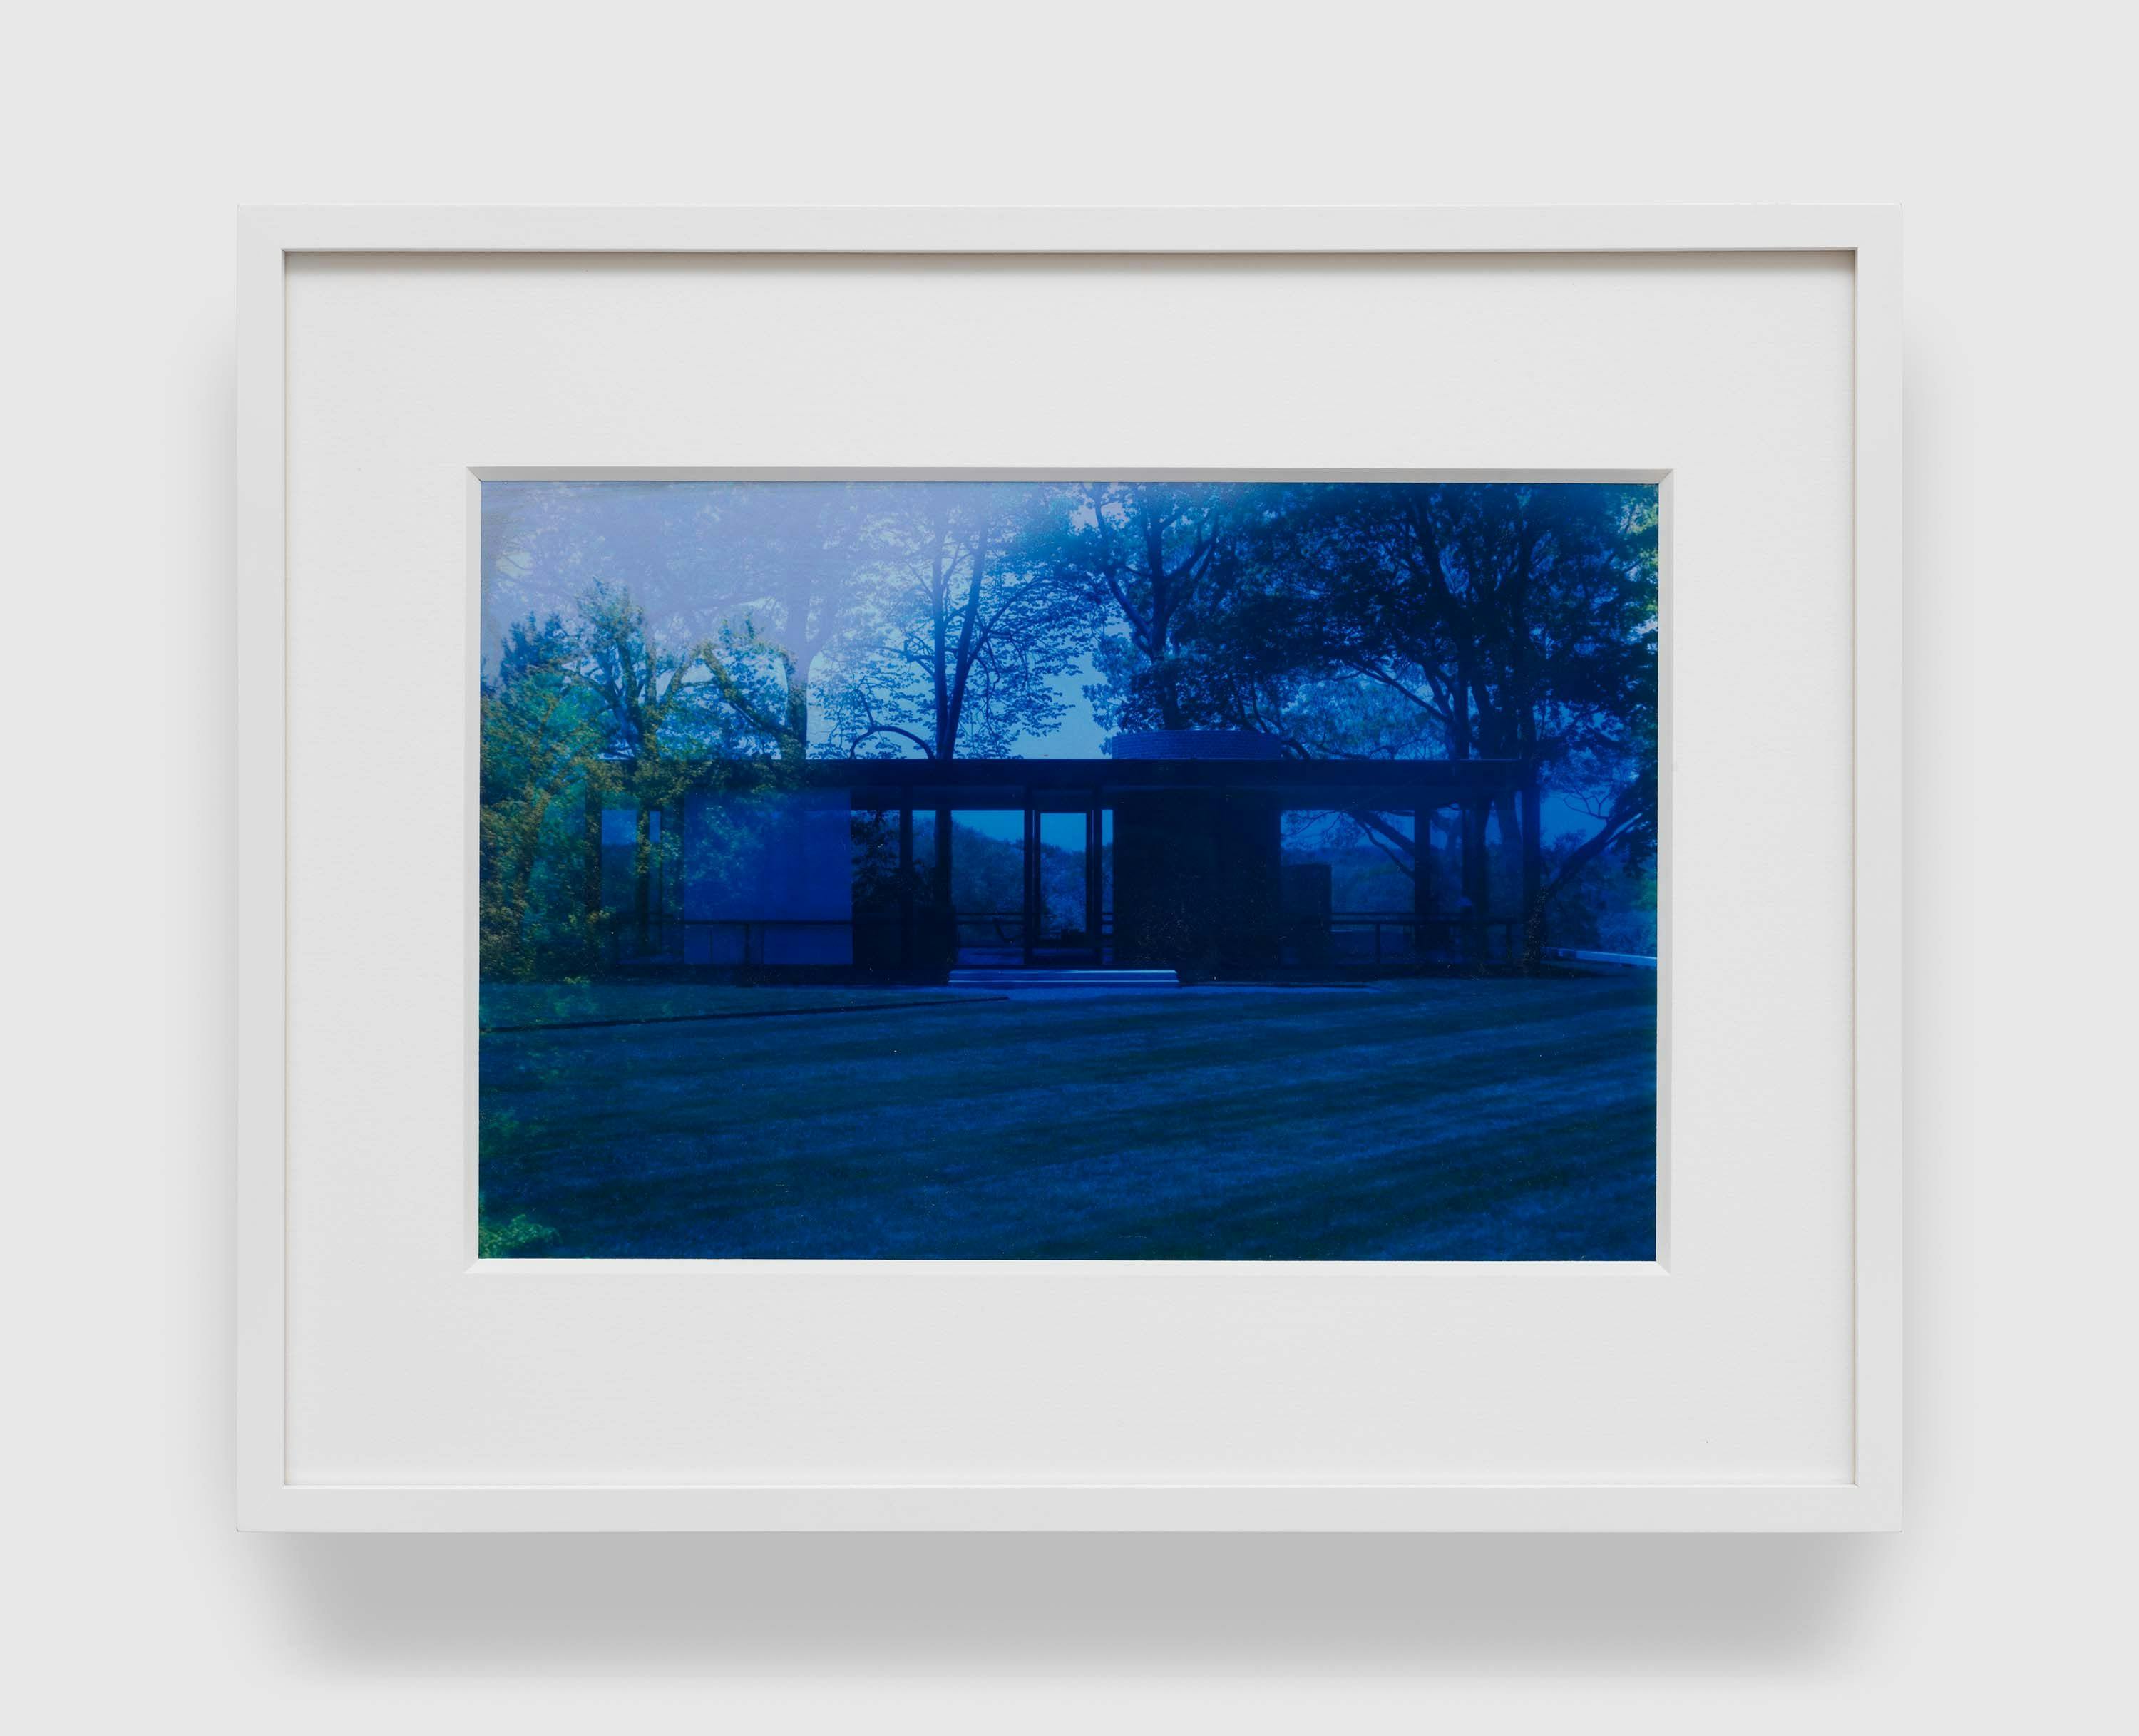 An acrylic on inkjet print by James Welling, titled 6009, dated 2008.